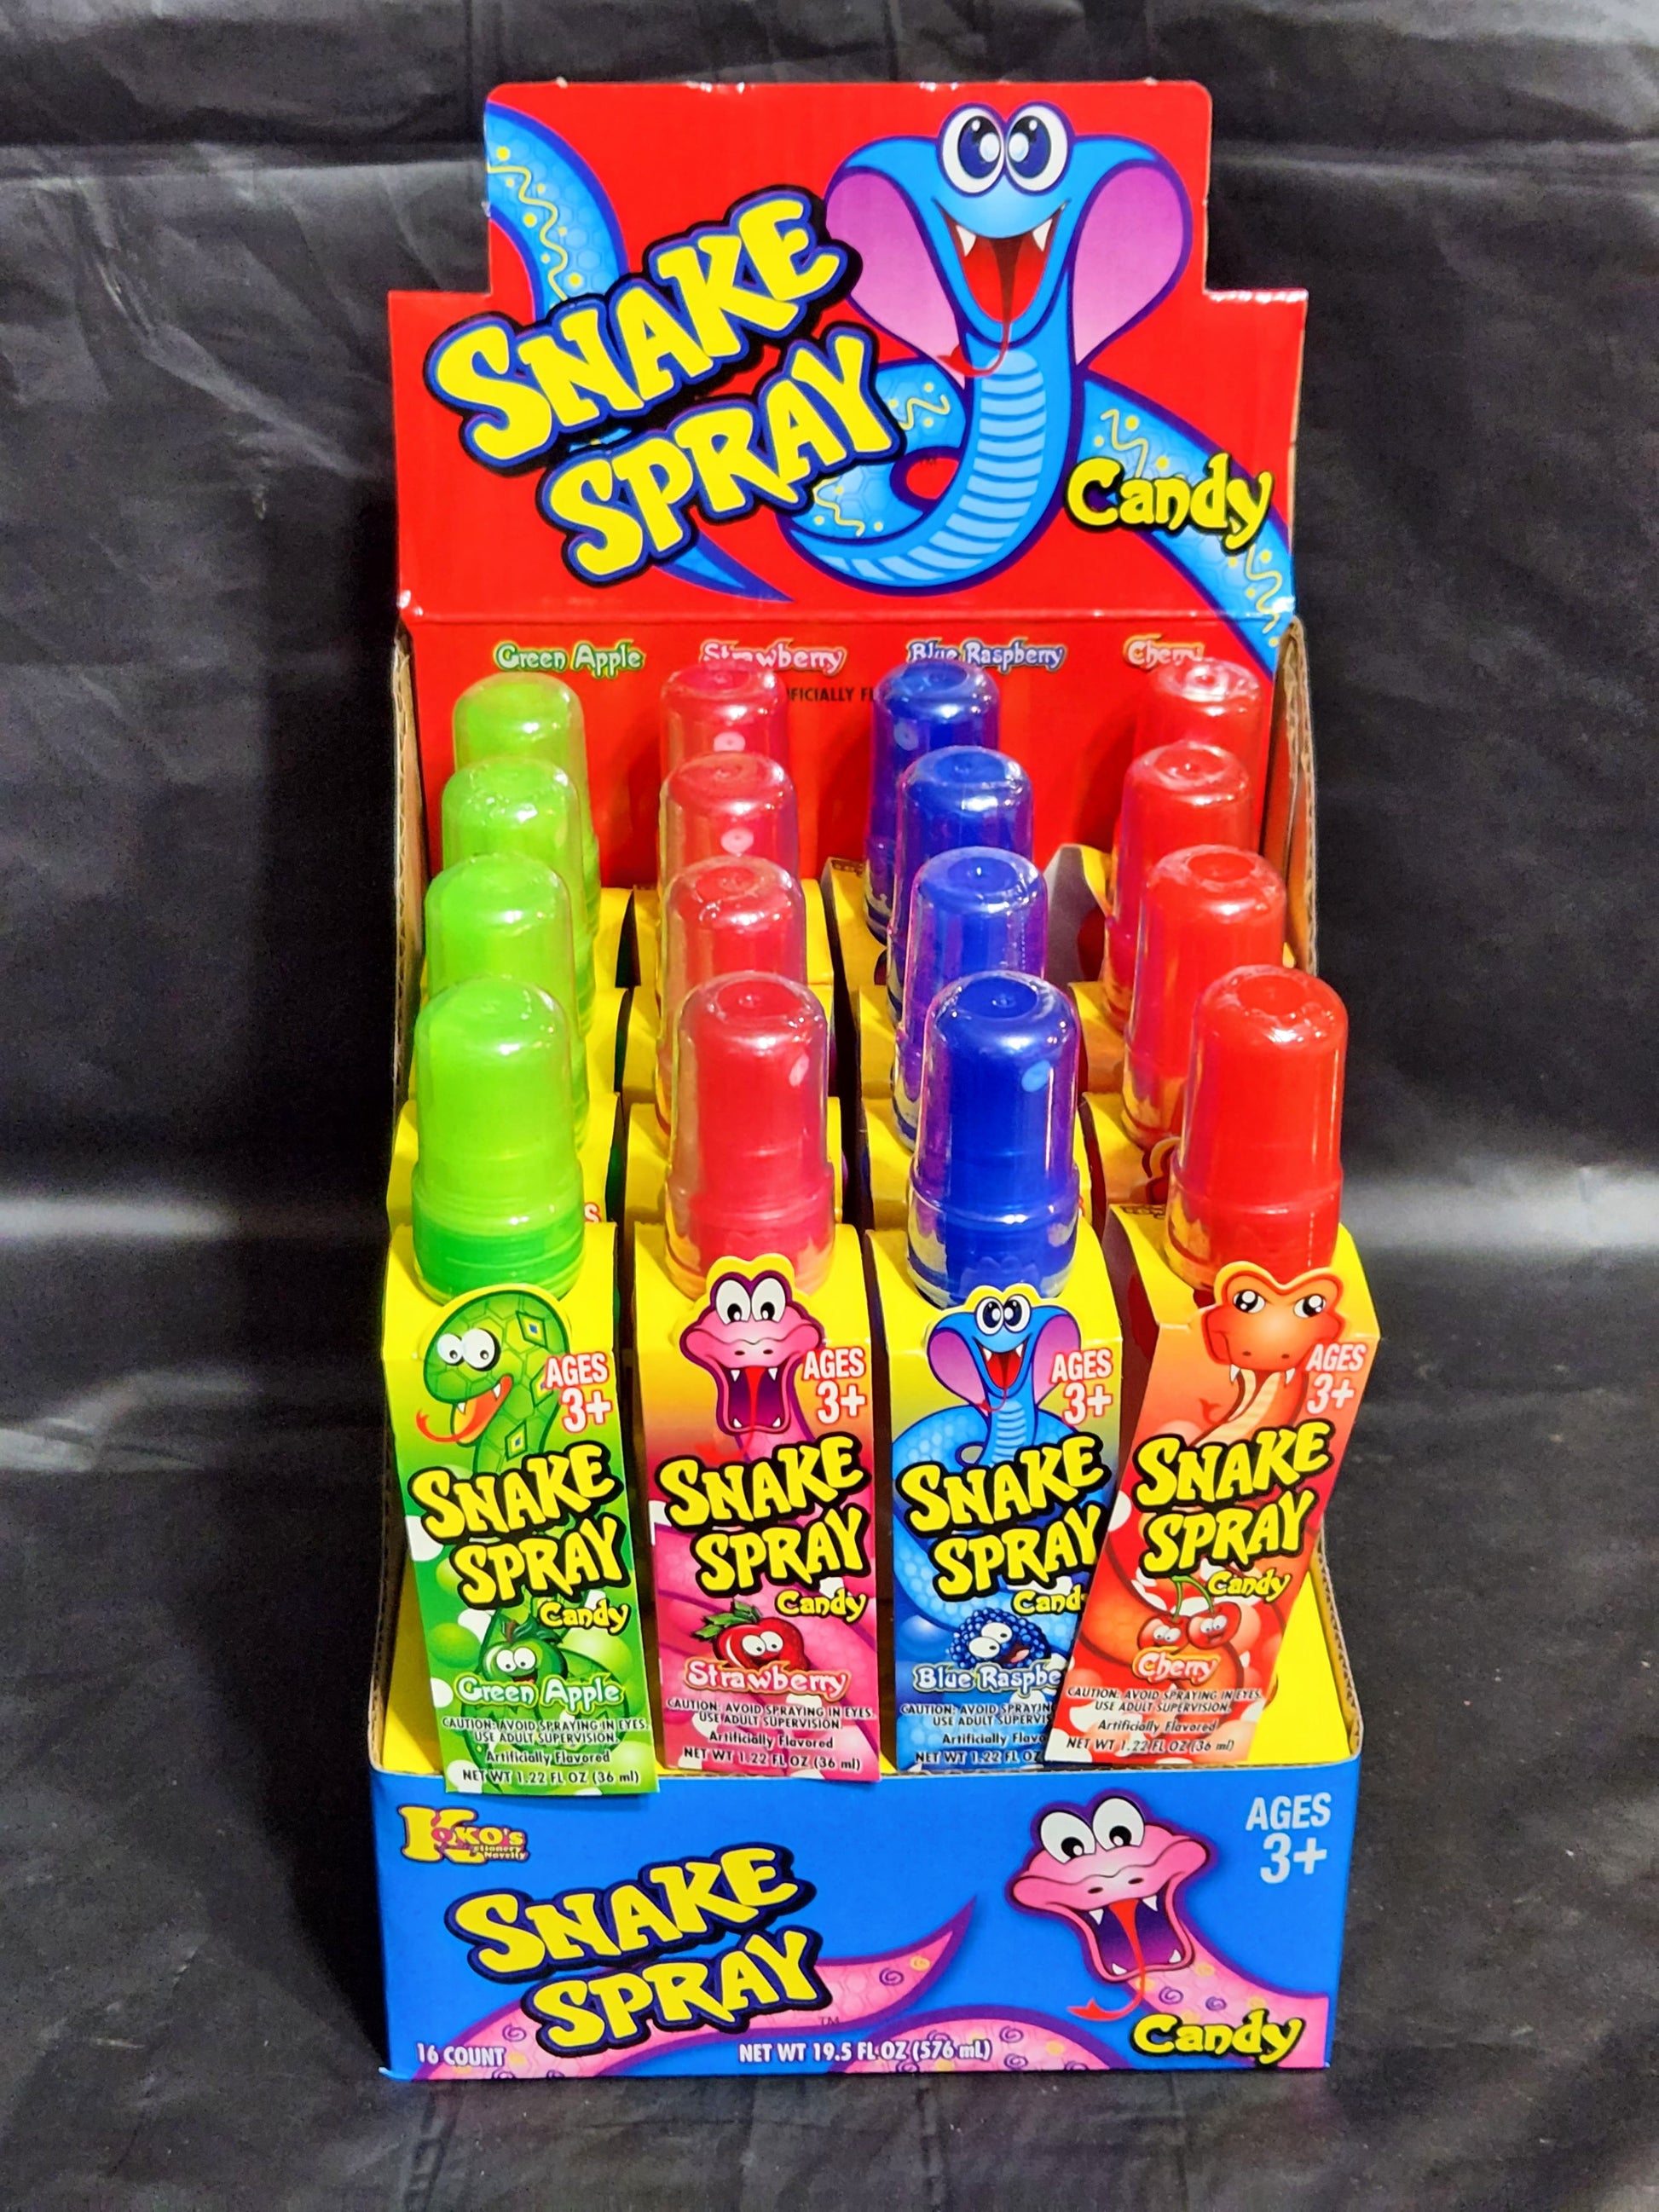 Tube spray of Mega mouth strawberry flavour candy sweet spray